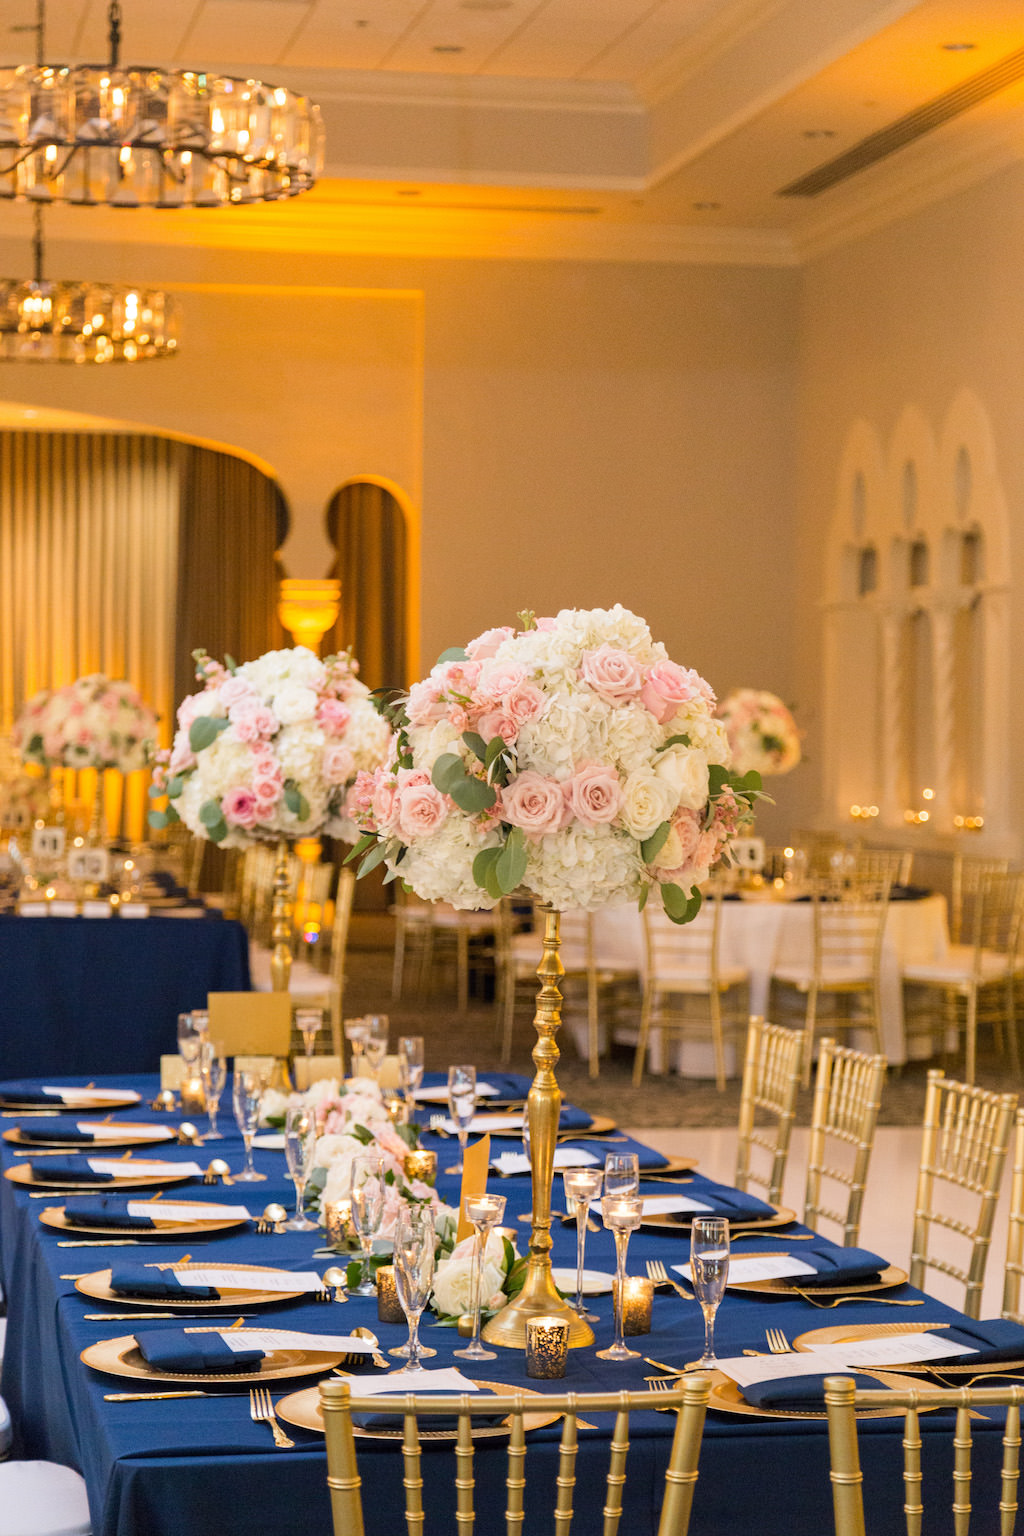 Southern Charm Hotel Ballroom Wedding Reception with Tall White and Pink with Greenery Centerpiece in Gold Candelabra Vase, with Gold Chiavari Chairs and Chargers, Navy Blue Linens and Tablecloth | St Pete Historic Hotel Wedding Reception Venue The Vinoy Renaissance